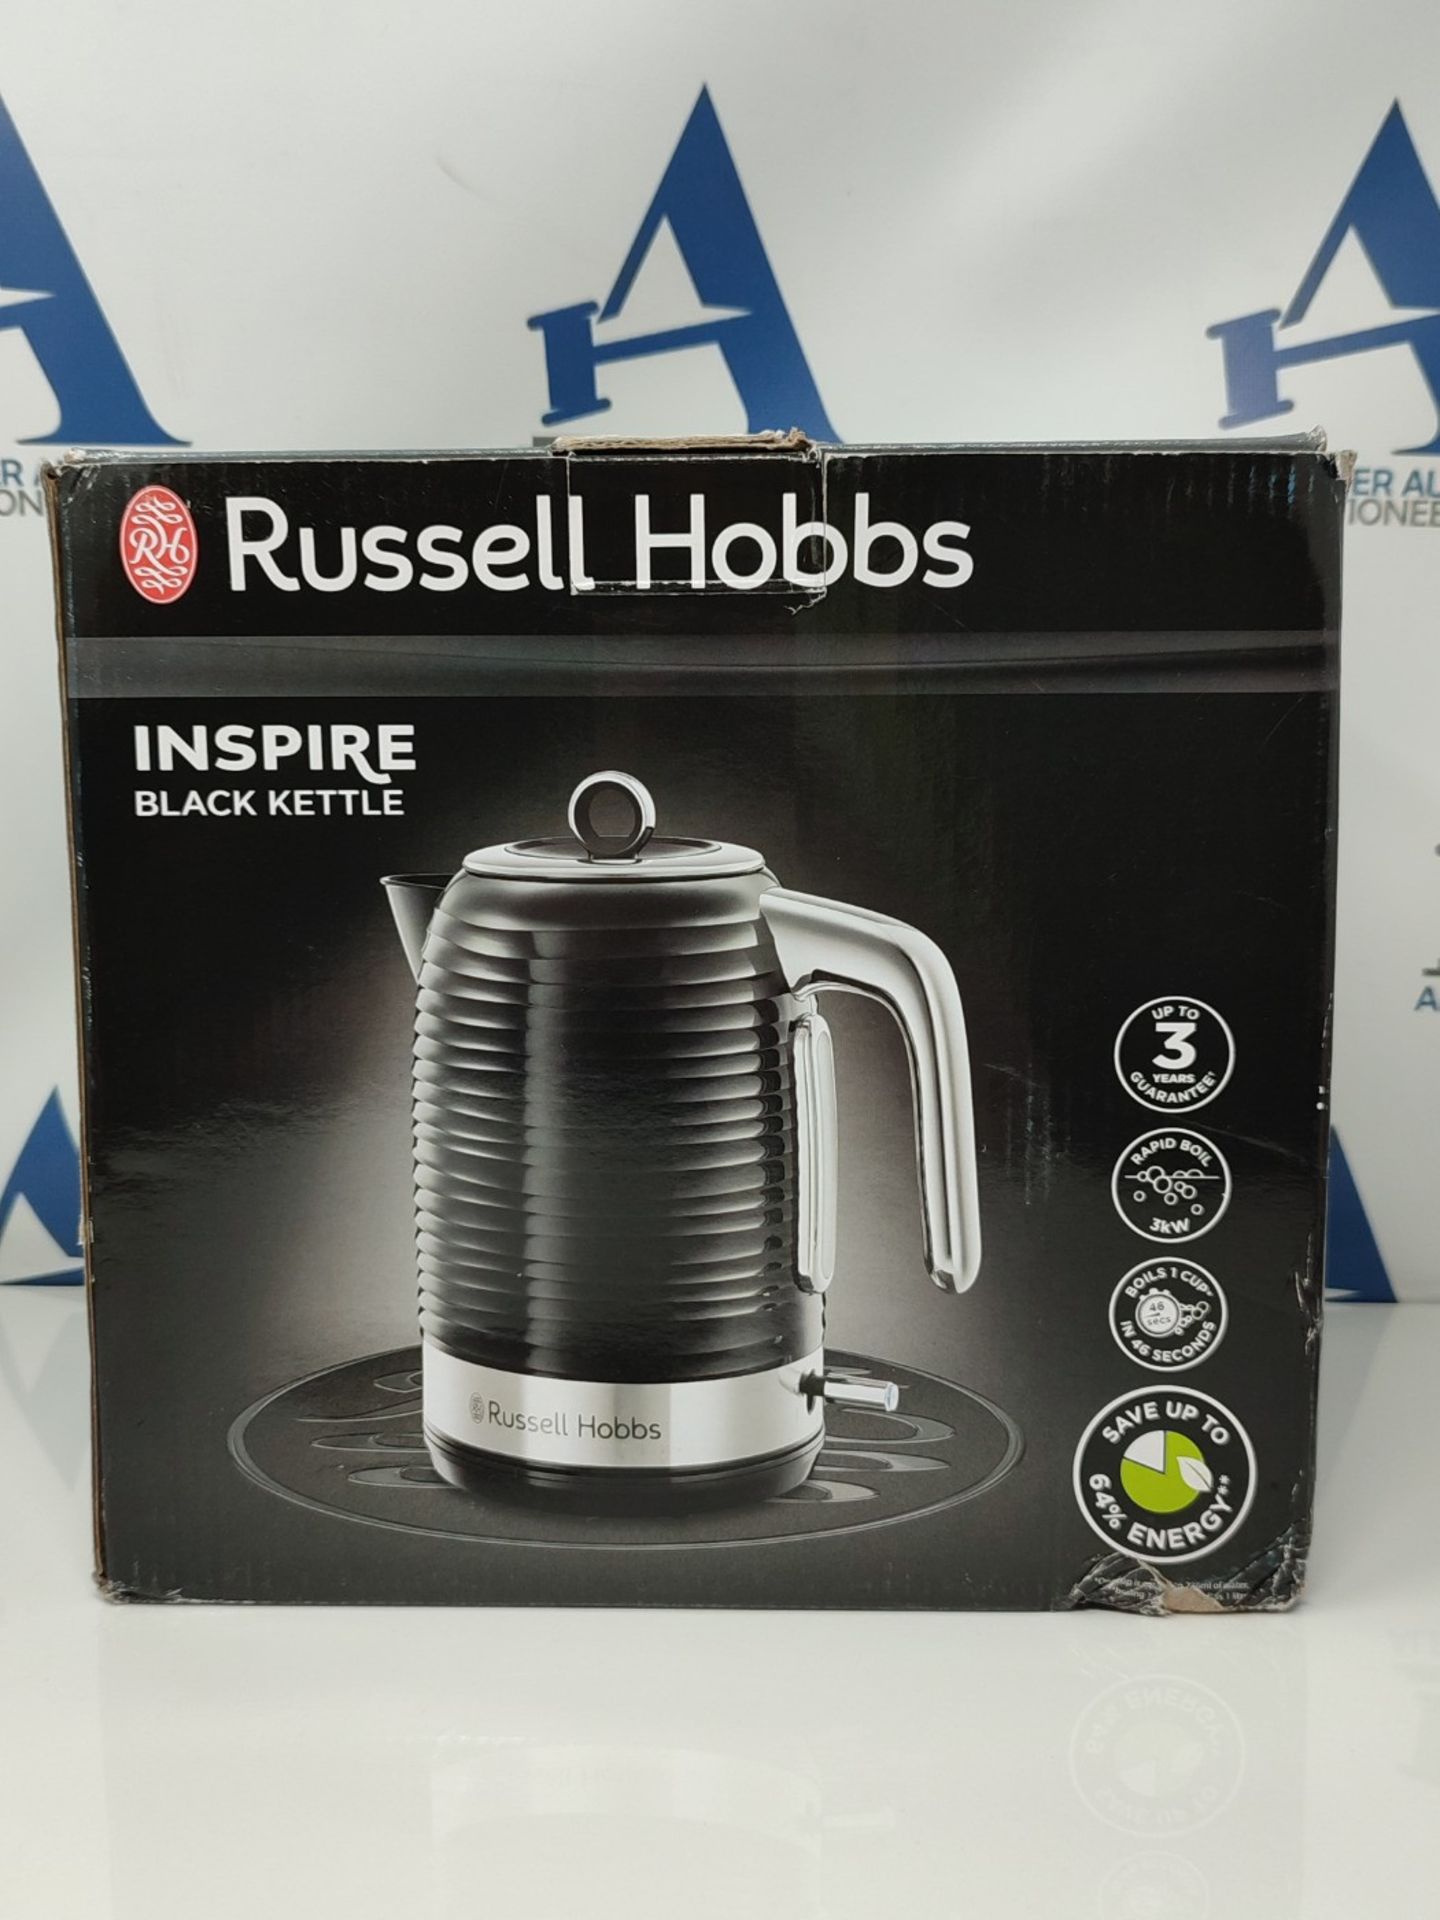 Russell Hobbs 24361 Inspire Electric Fast Boil Kettle, 3000 W, 1.7 Litre, Black with C - Image 2 of 3